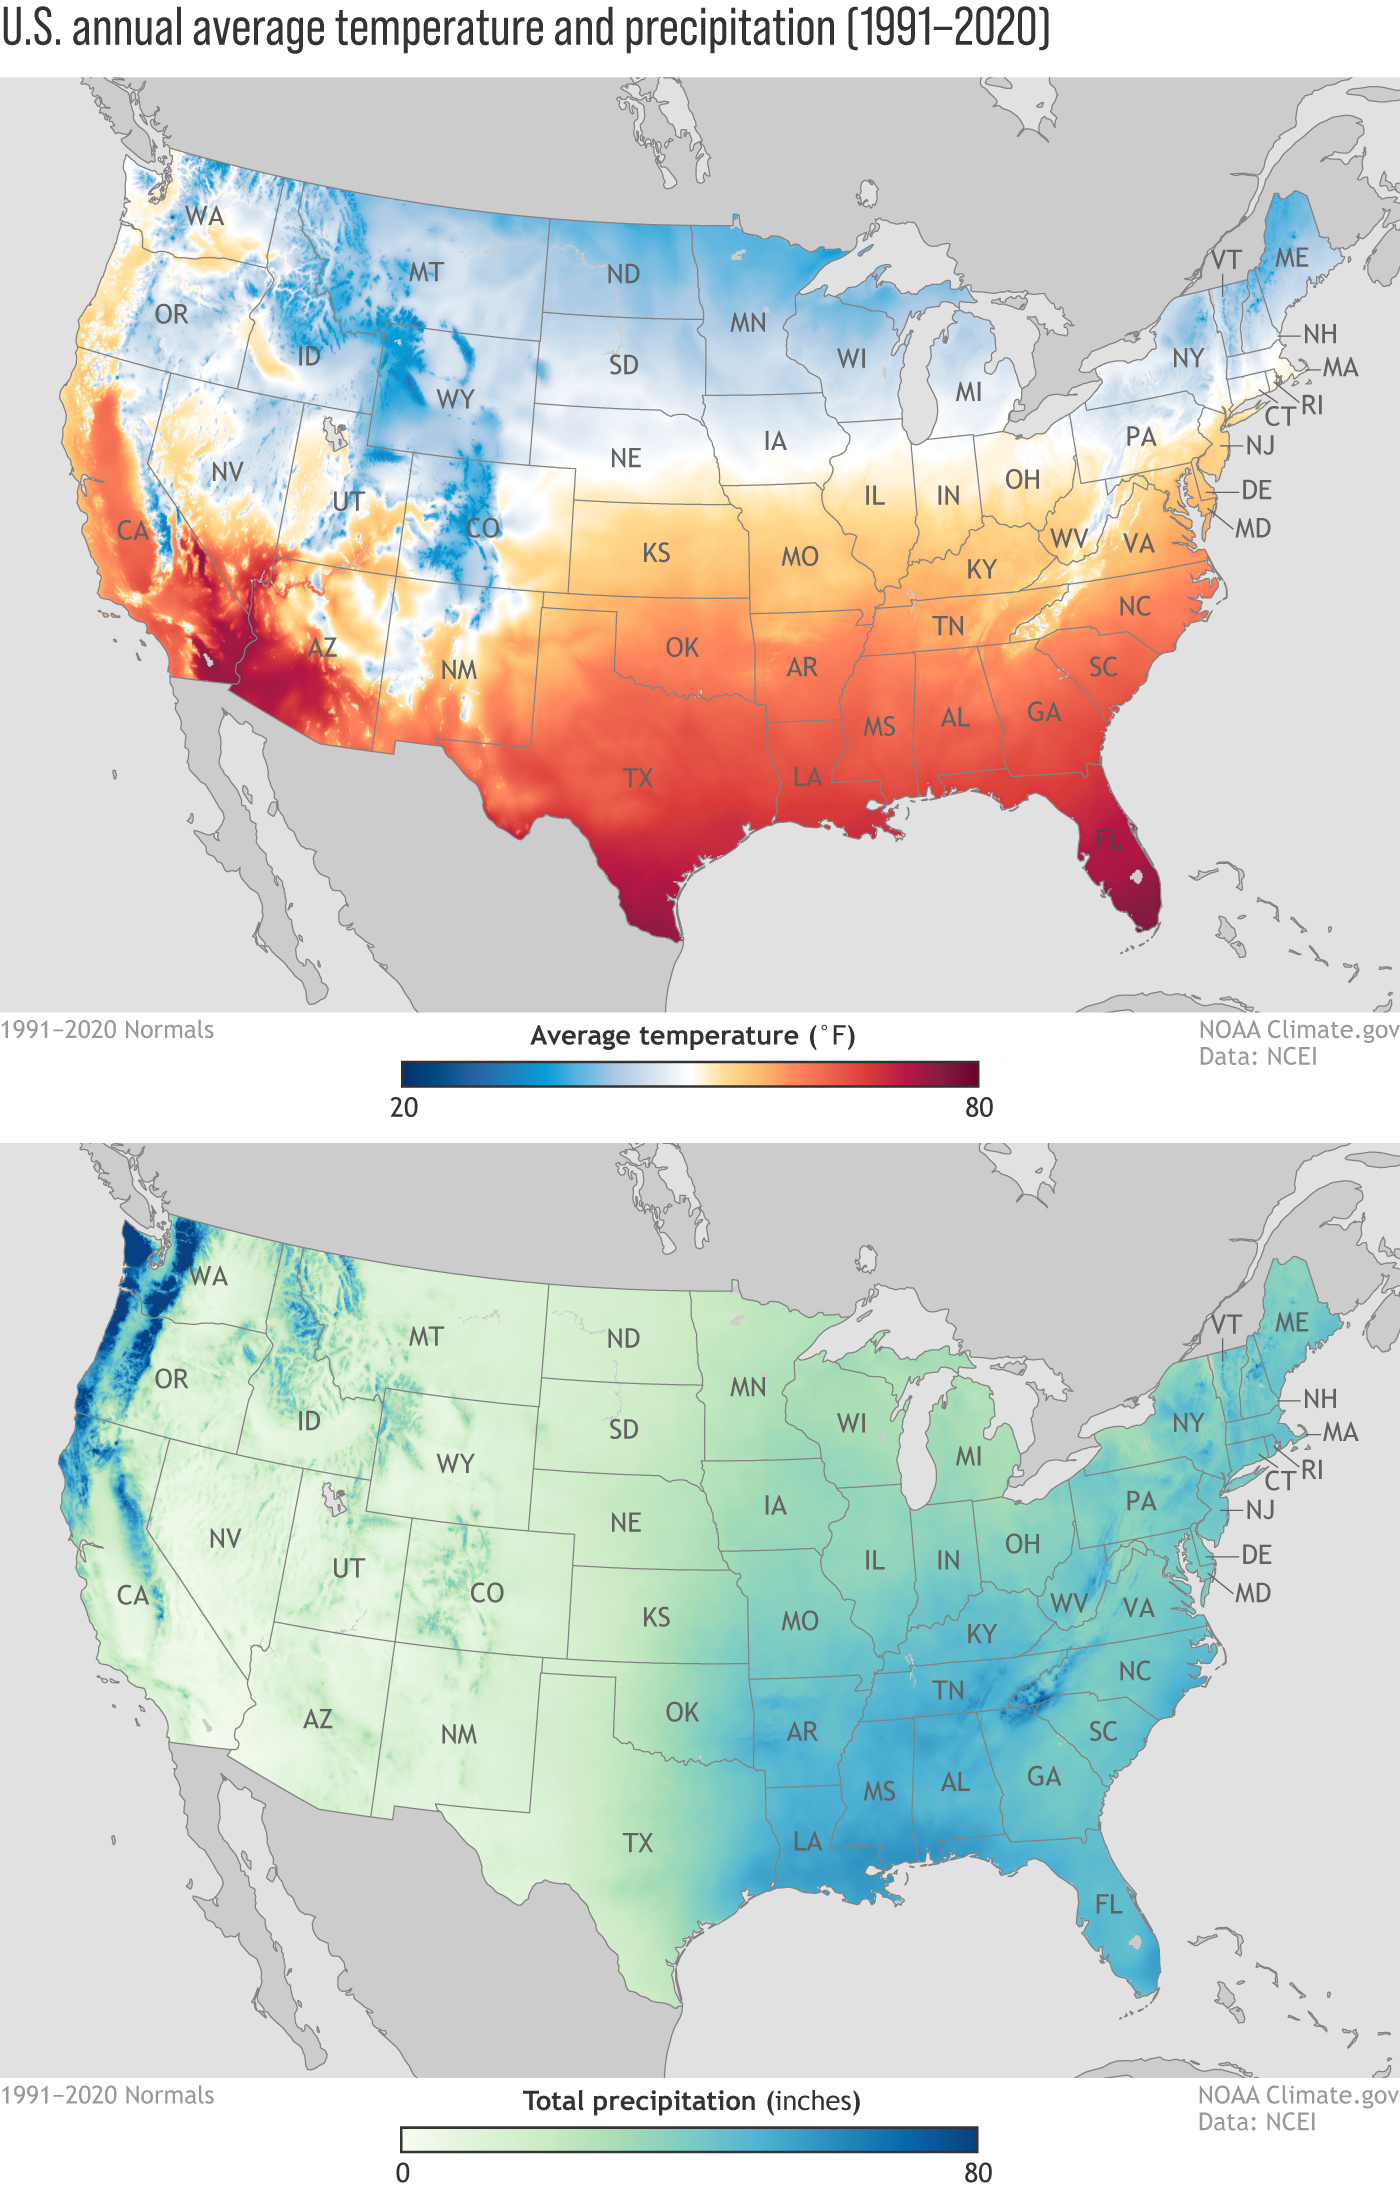 New Maps Released of Annual Average Temperature and Precipitation from the U.S. Climate Normals